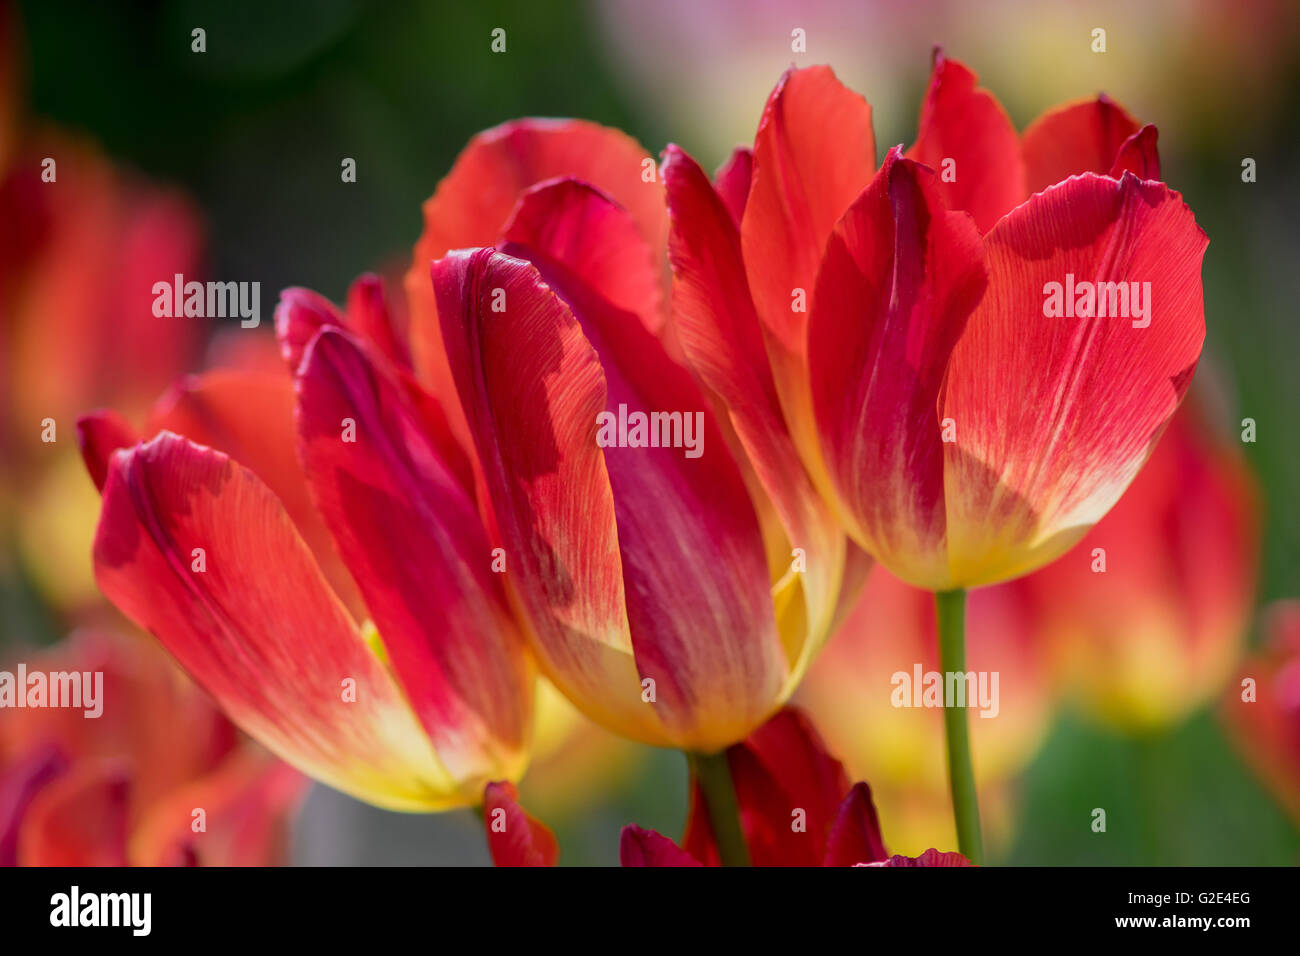 Three sunlit red and yellow tulips close up Stock Photo